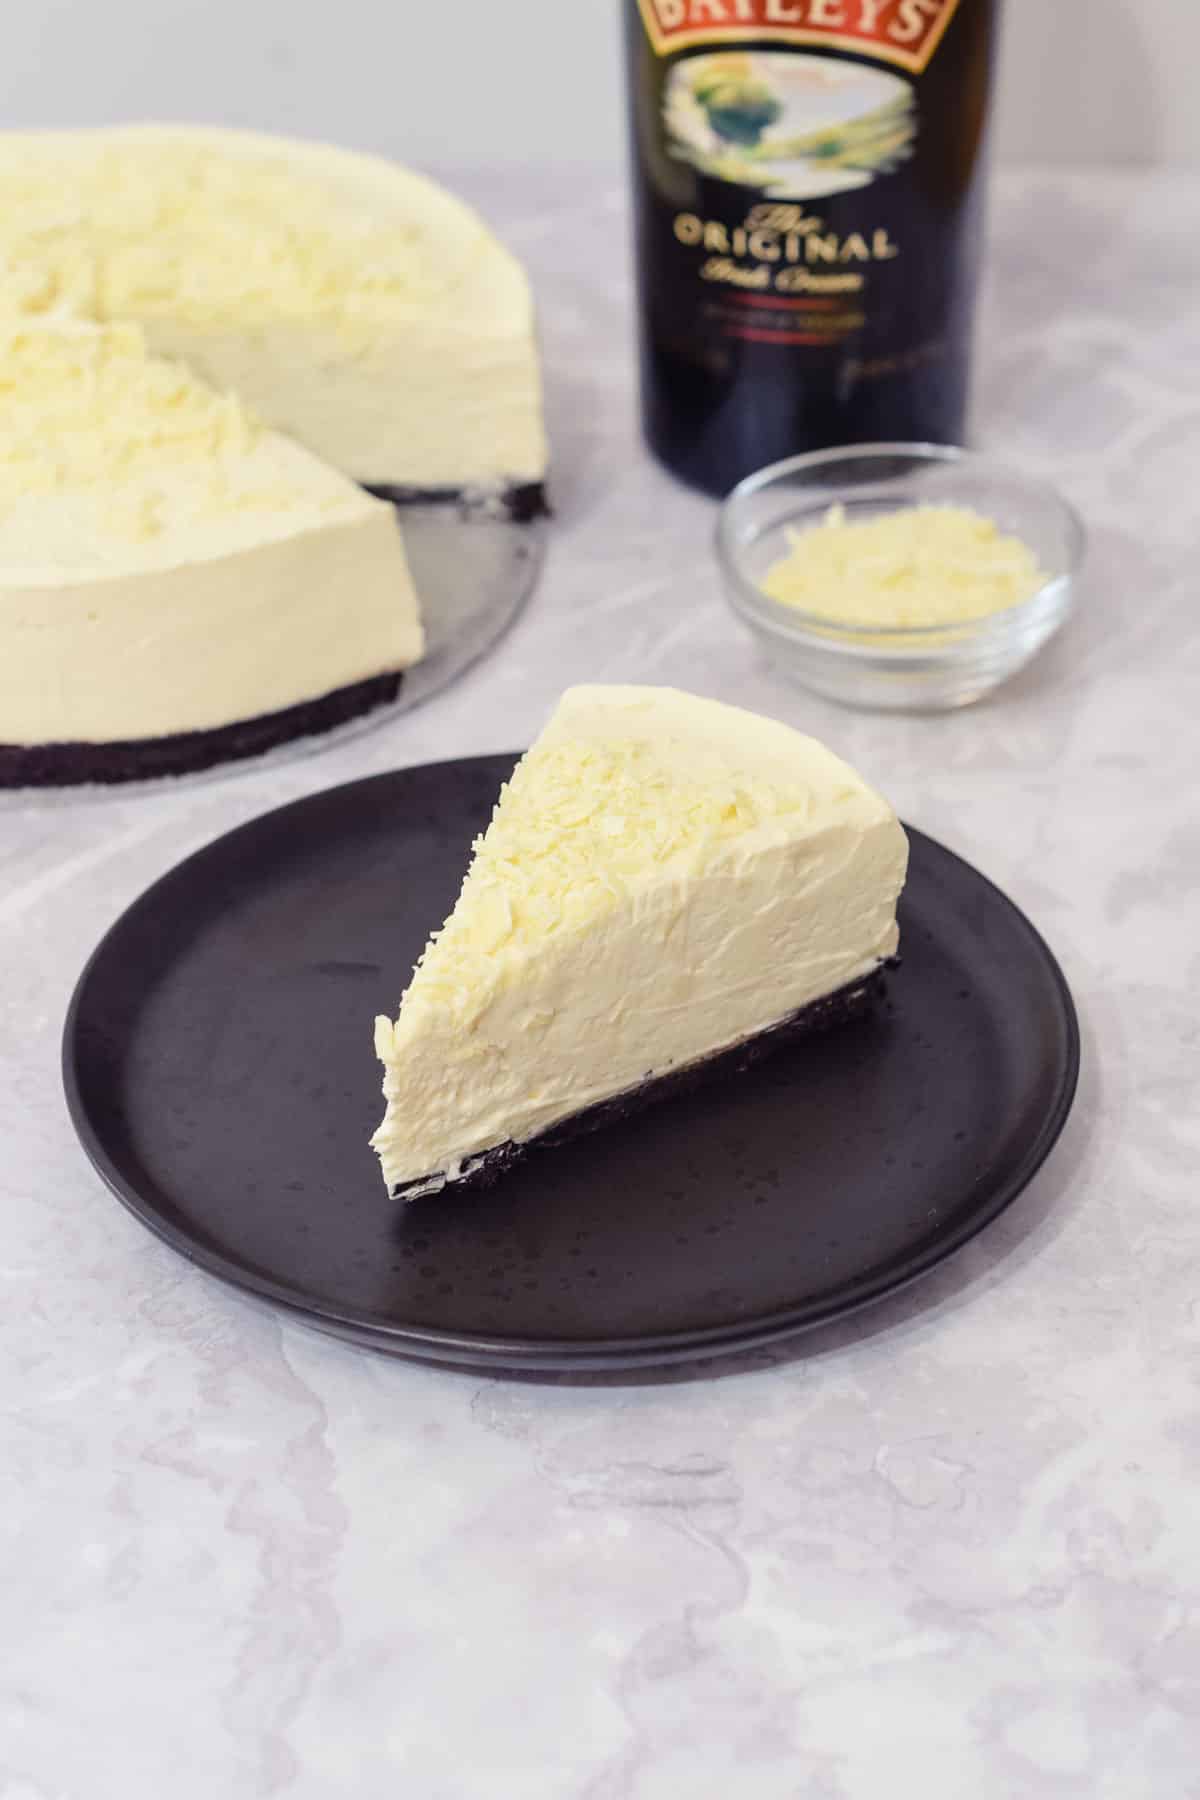 baileys white chocolate cheesecake with an oreo base and white chocolate topping.